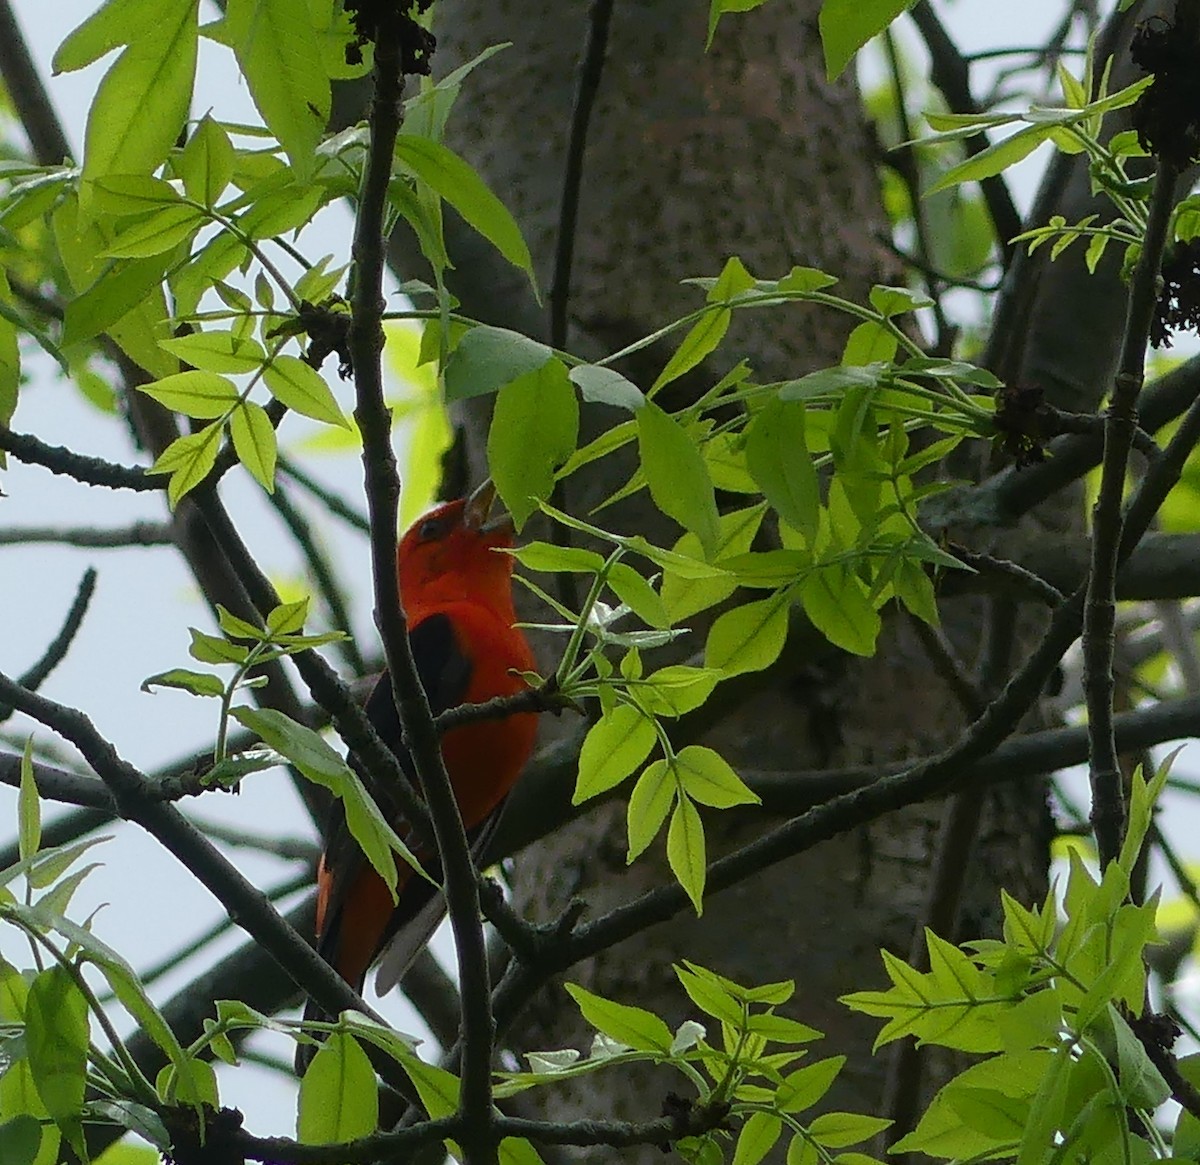 Scarlet Tanager - claudine lafrance cohl